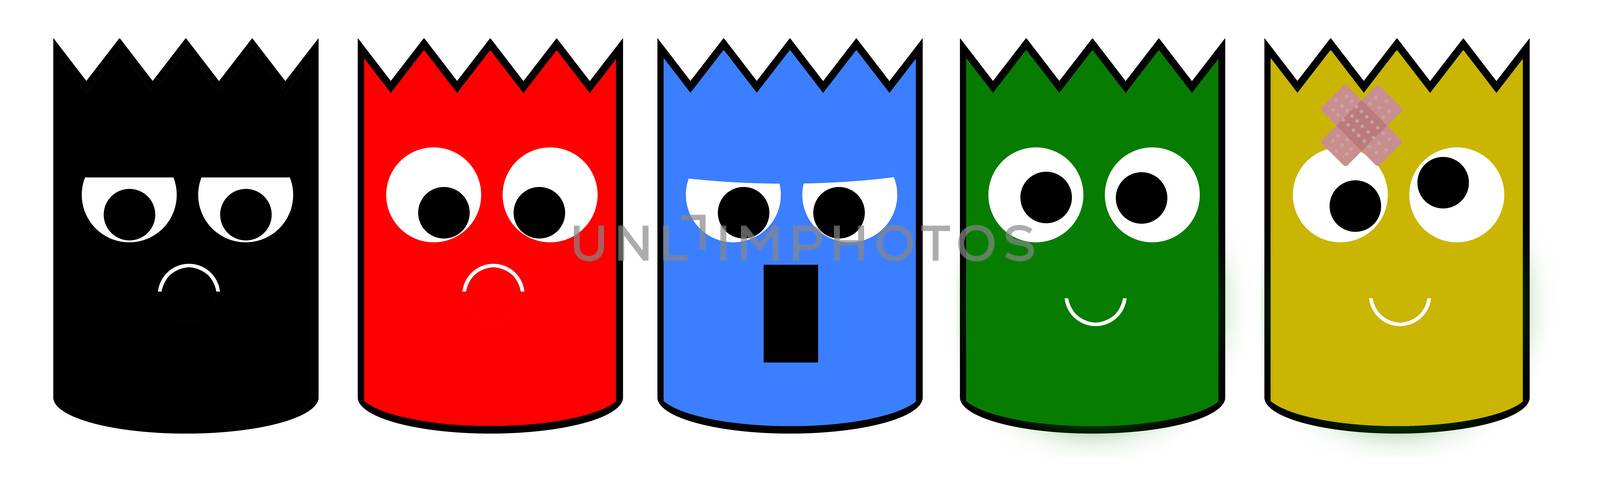 Illustration with colorful heads looking funny, angry and stupid